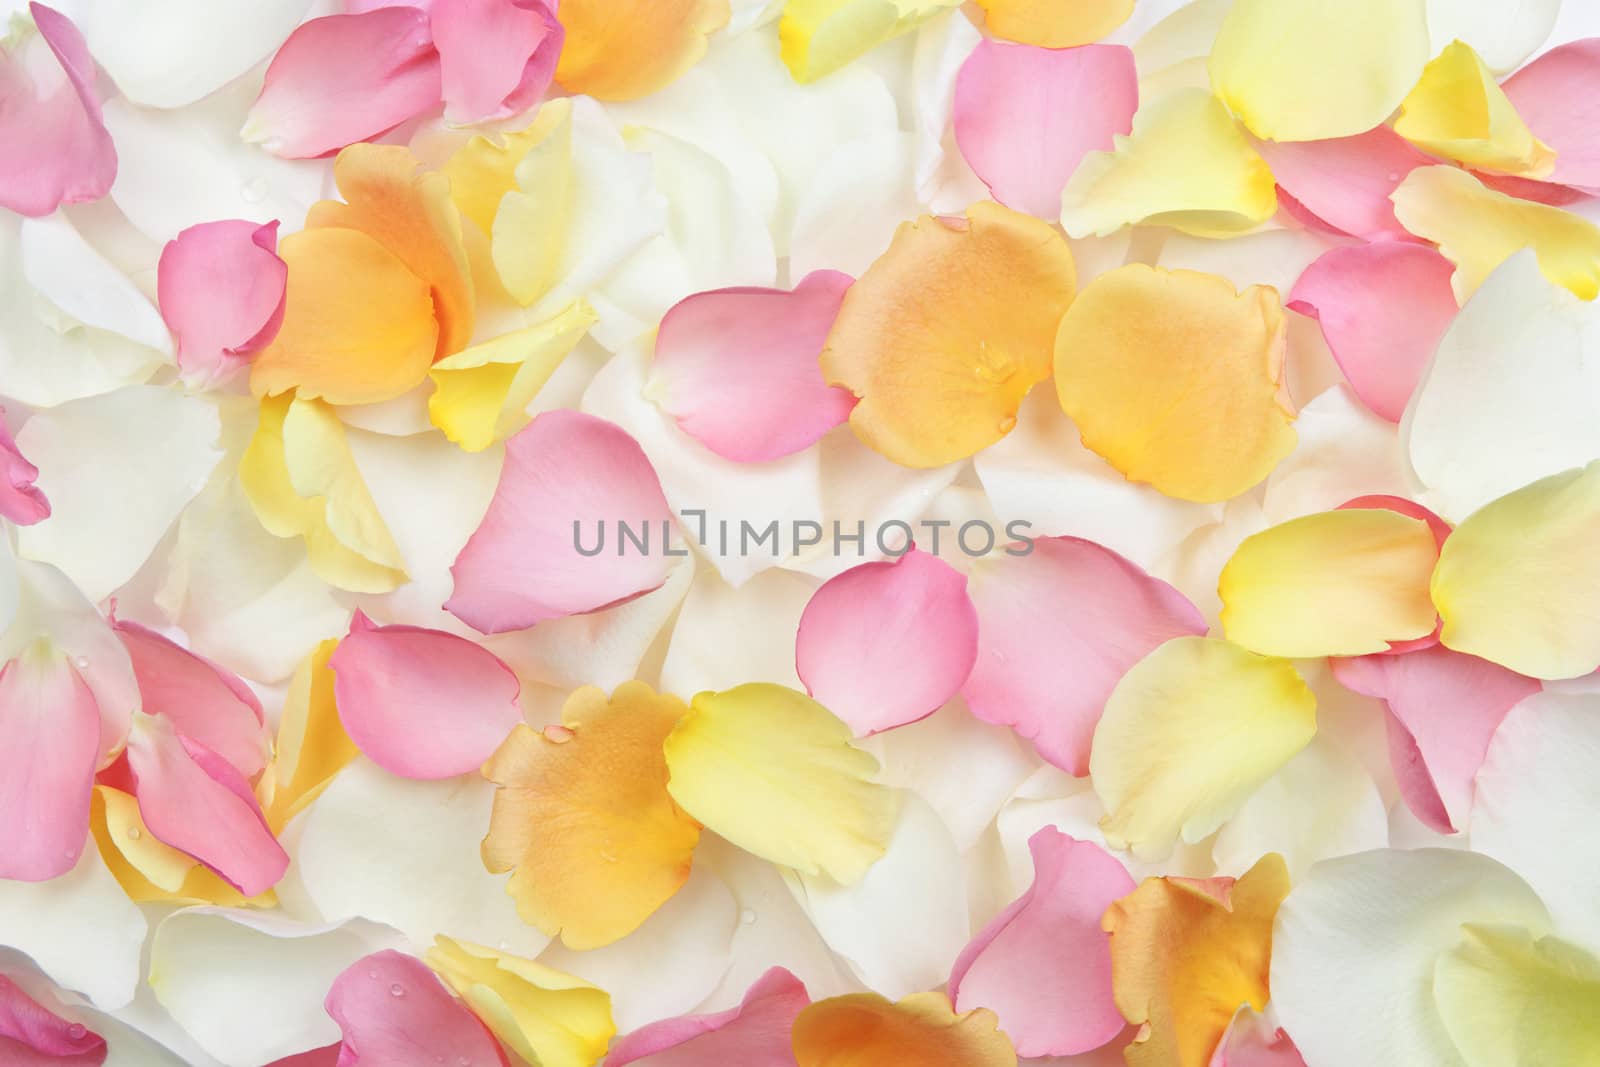 Abstract background of fresh scattered rose petals